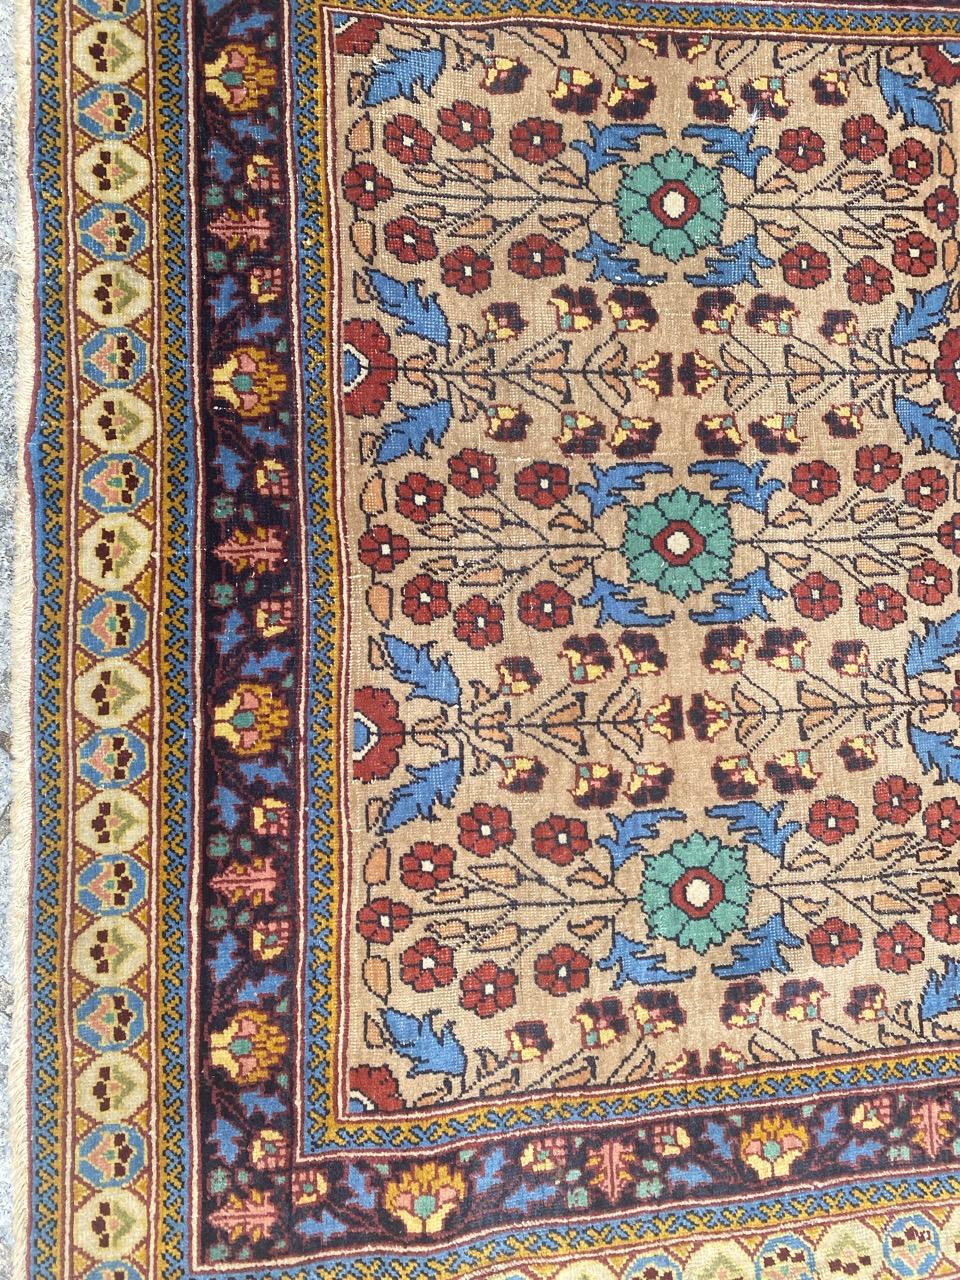 Very pretty early 20th century Sarouk rug with beautiful stylized floral design and nice colors with a yellow field color, entirely hand knotted with wool velvet on cotton foundation.

✨✨✨
